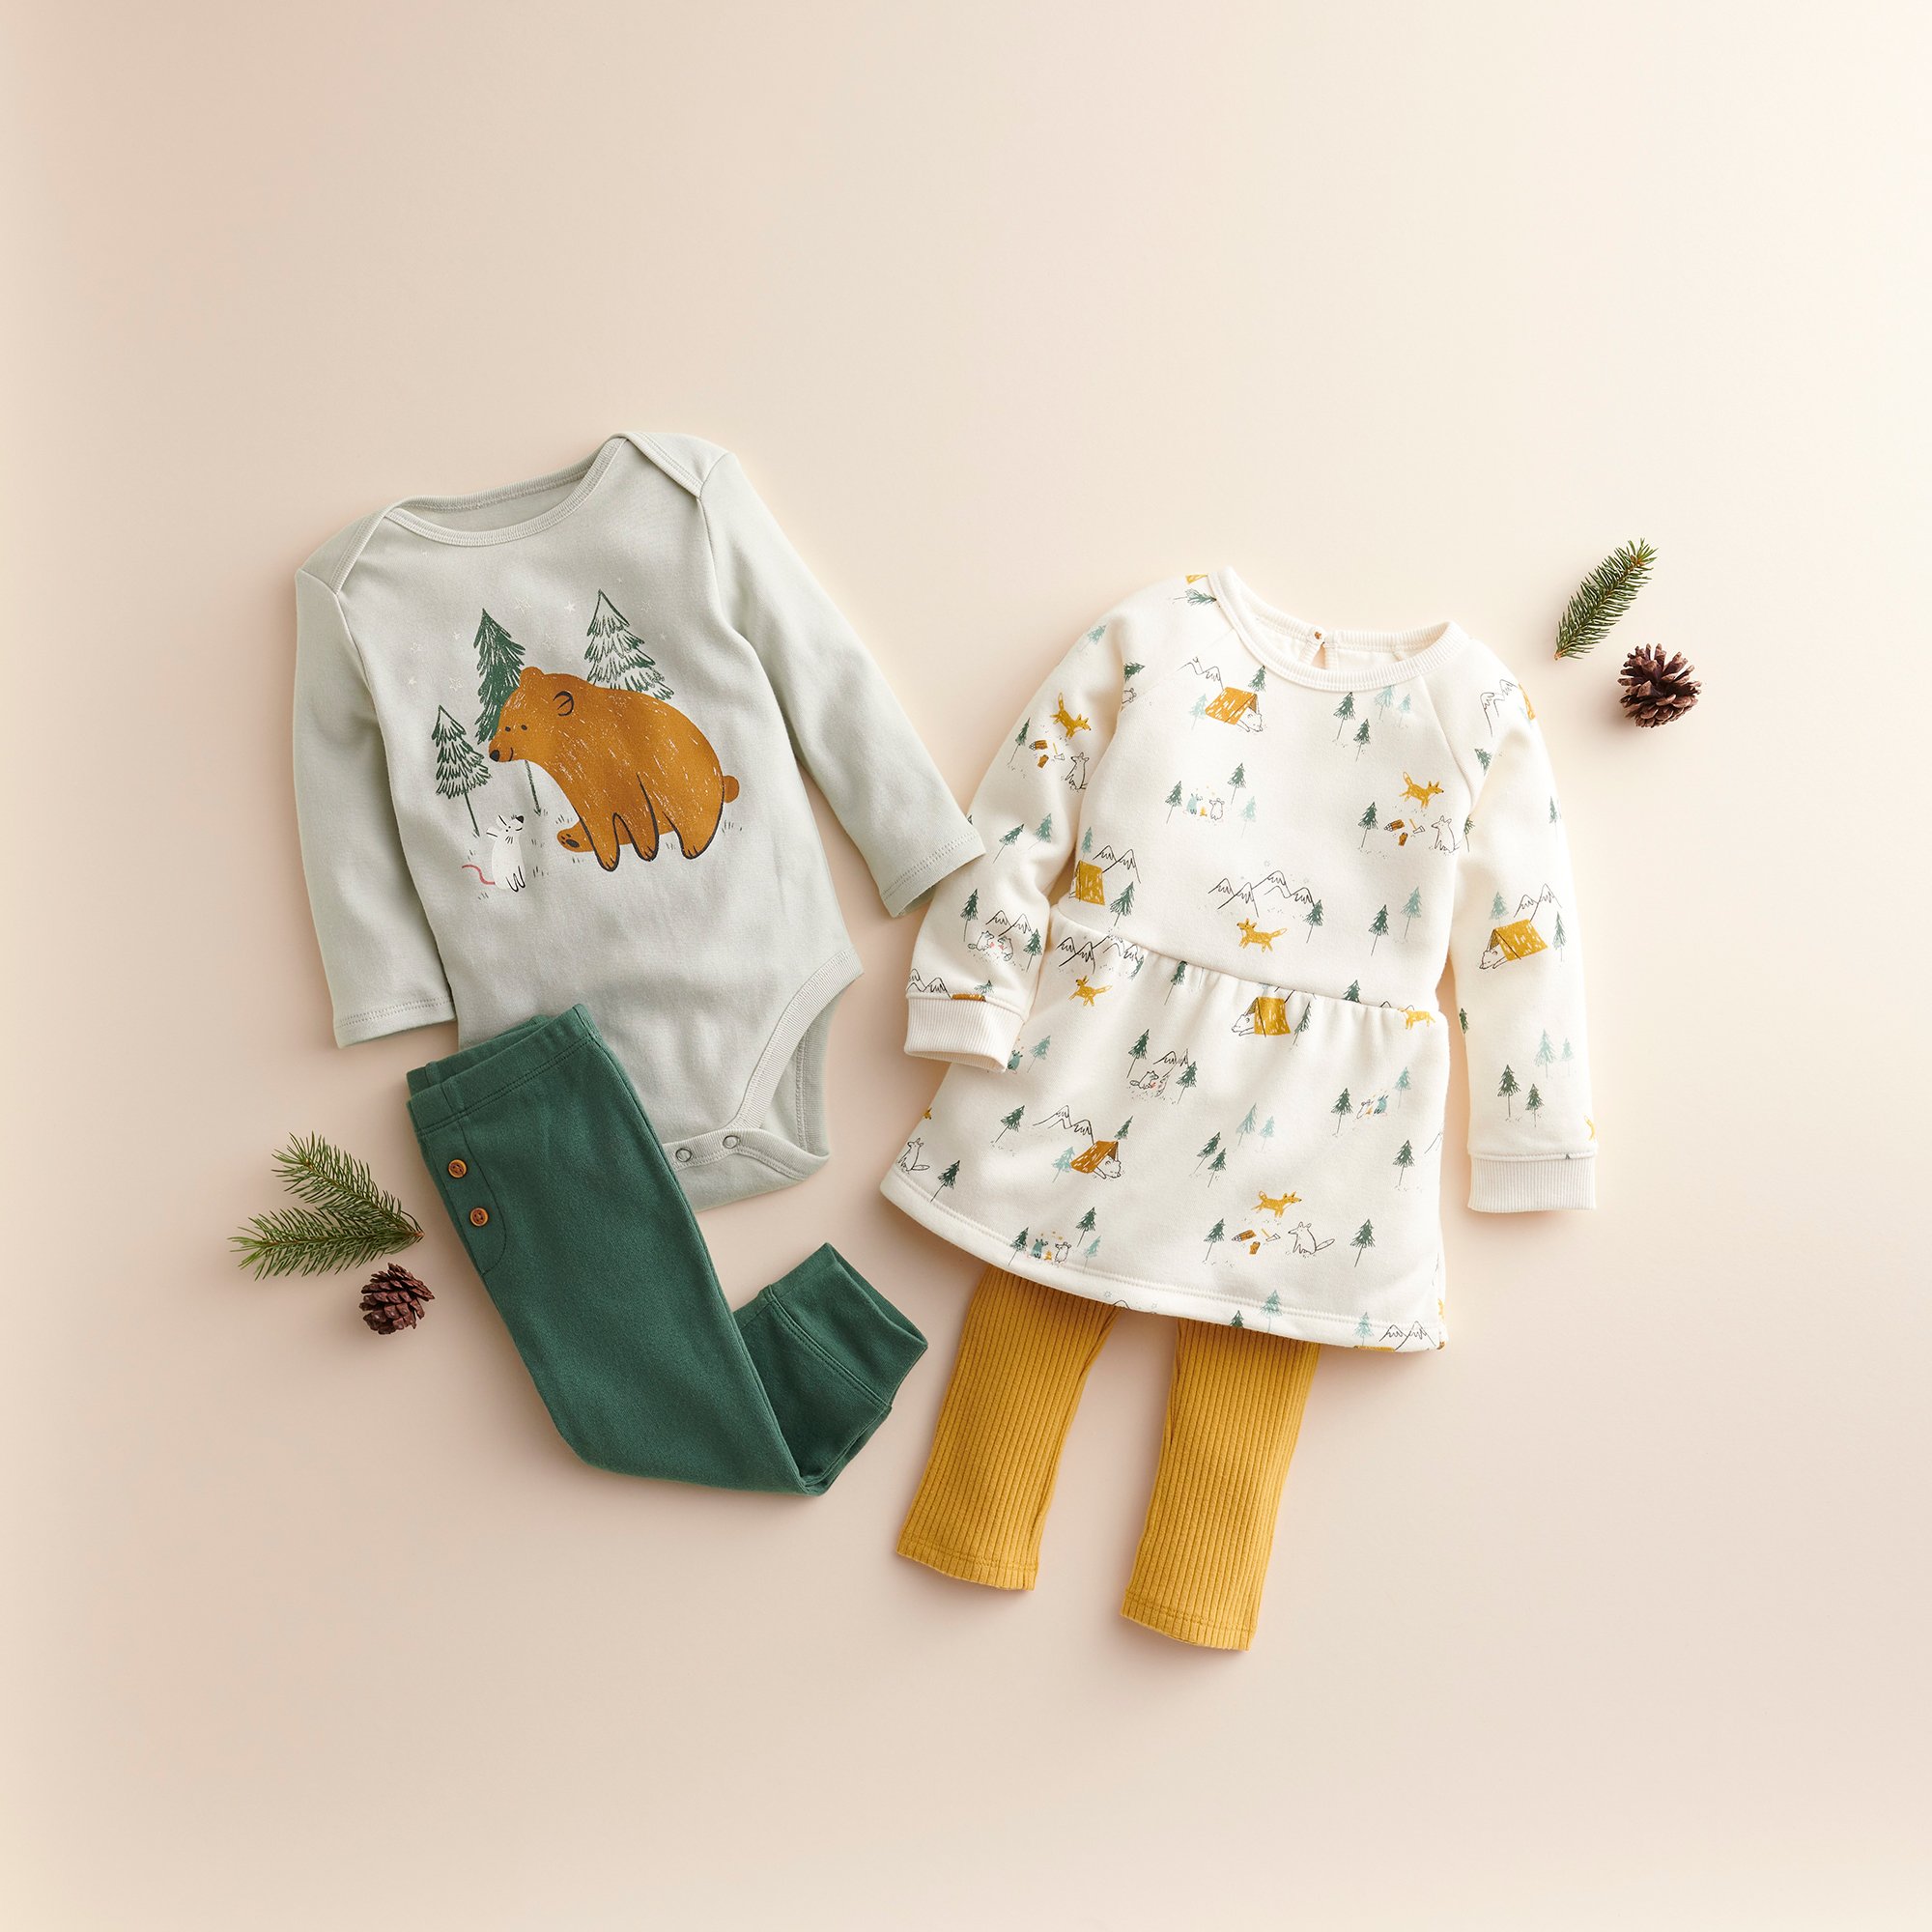 My Fall Little Co. Kids Collection is Here